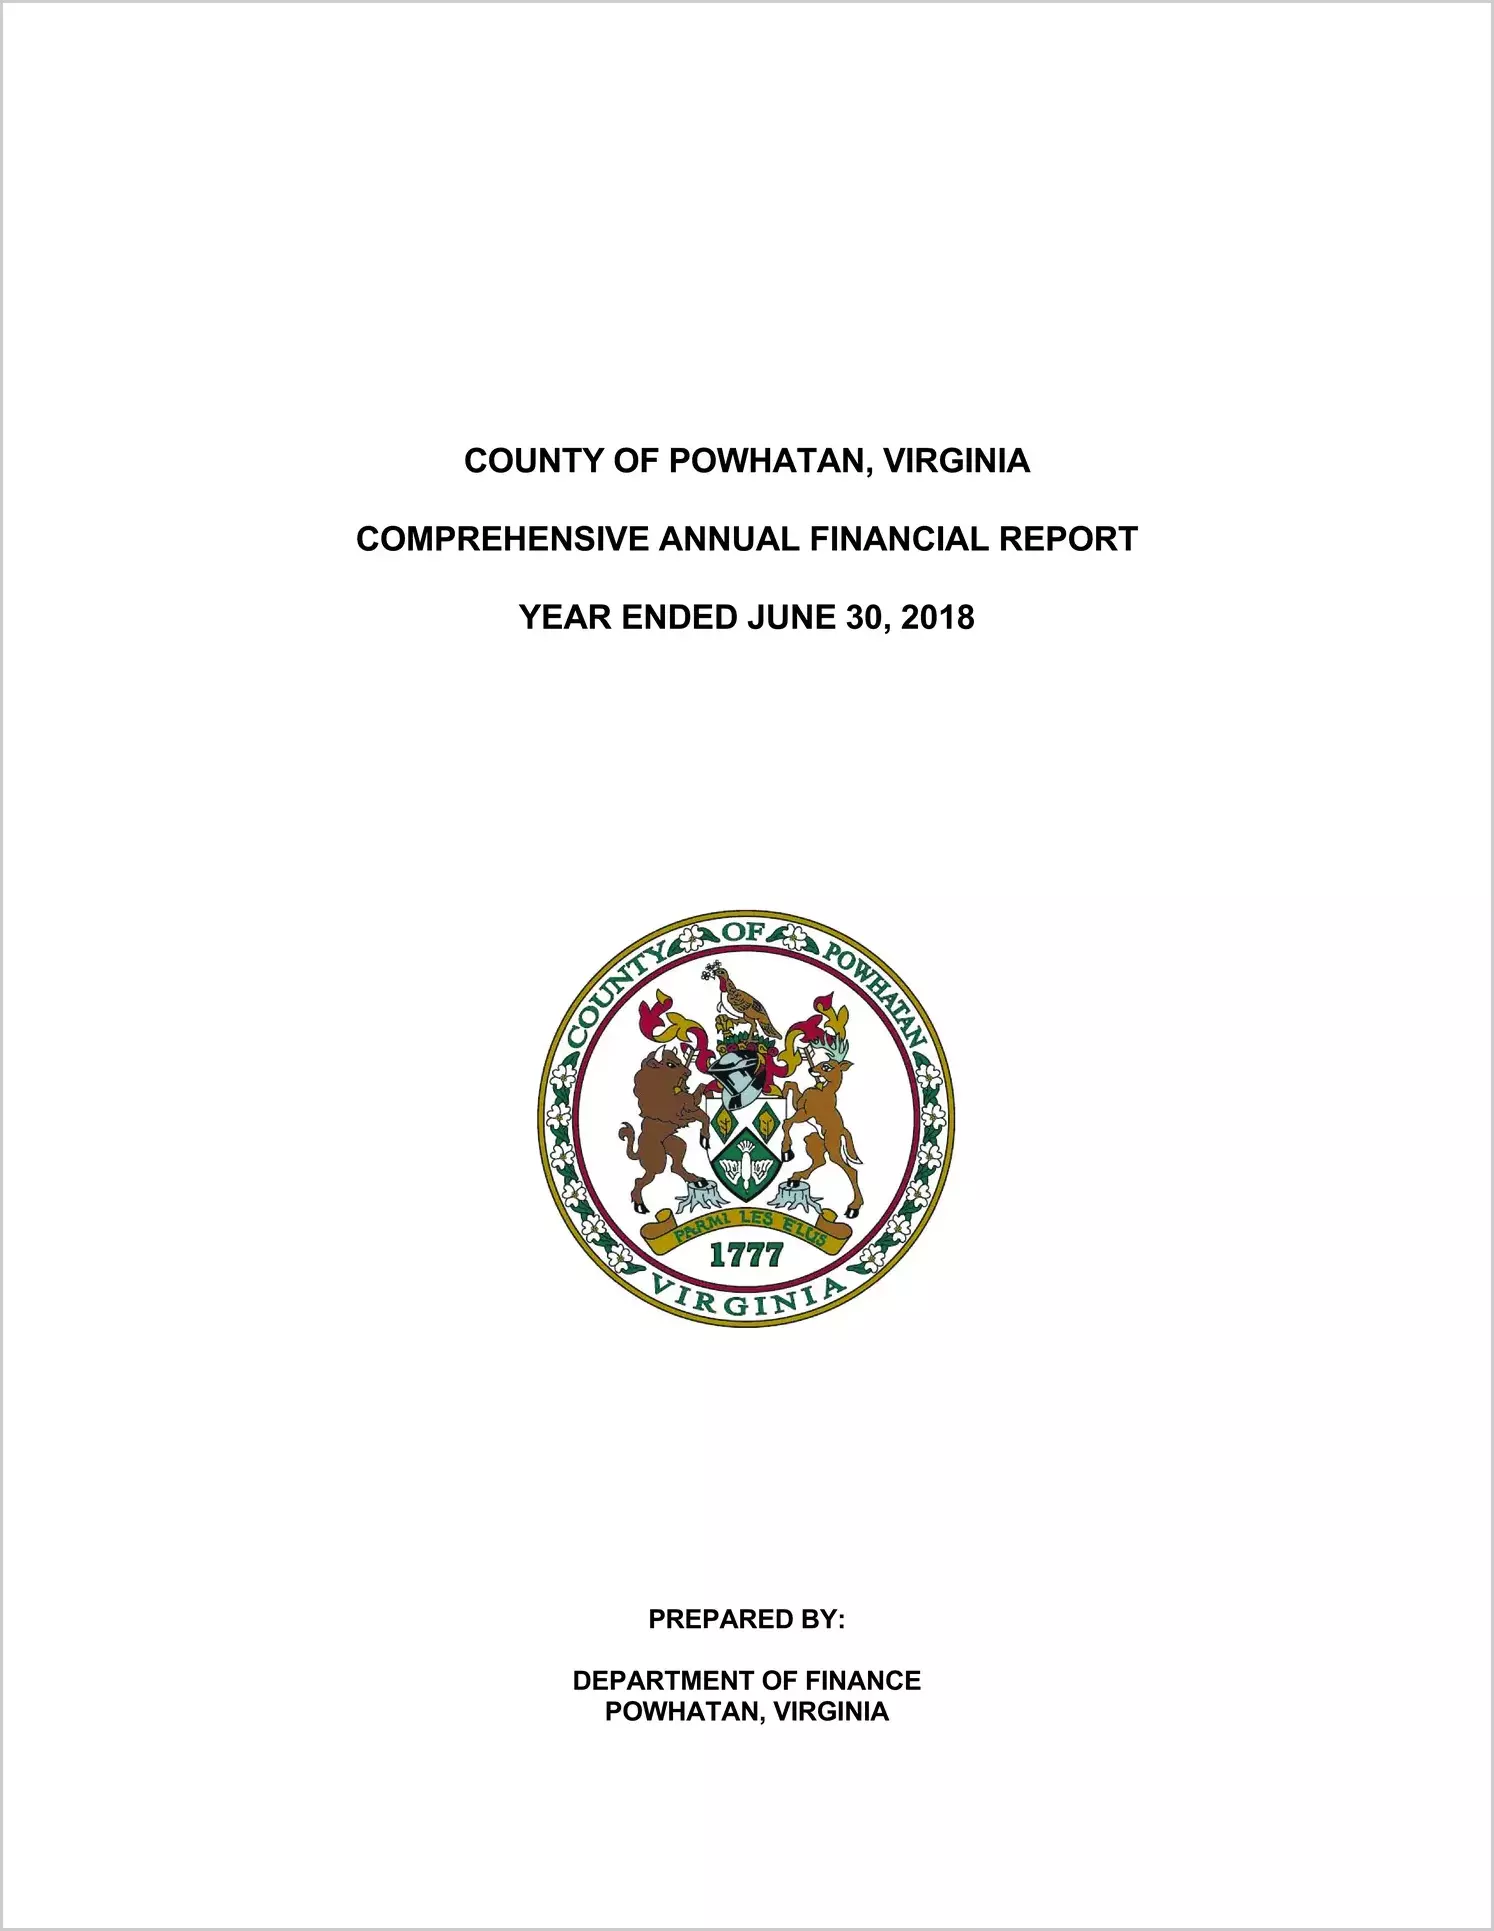 2018 Annual Financial Report for County of Powhatan